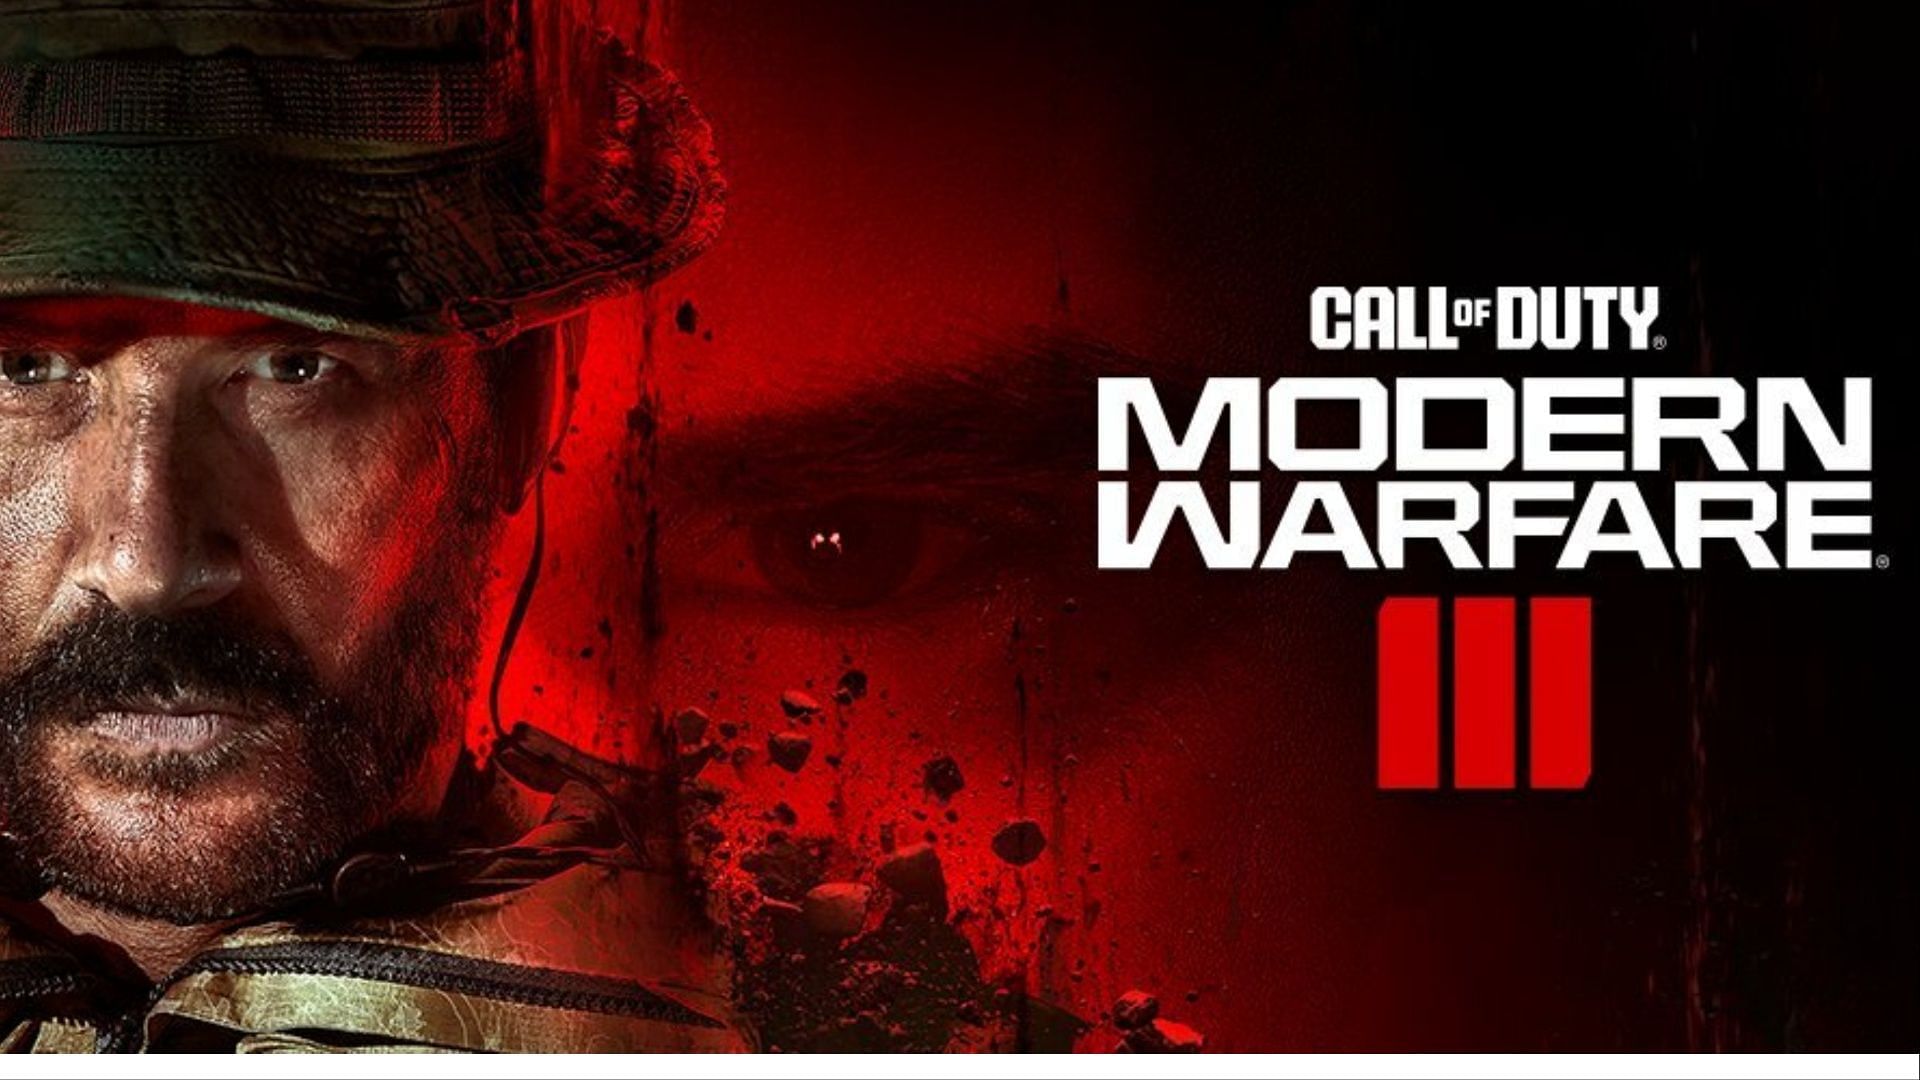 Modern Warfare 3 Price, preorder details and more